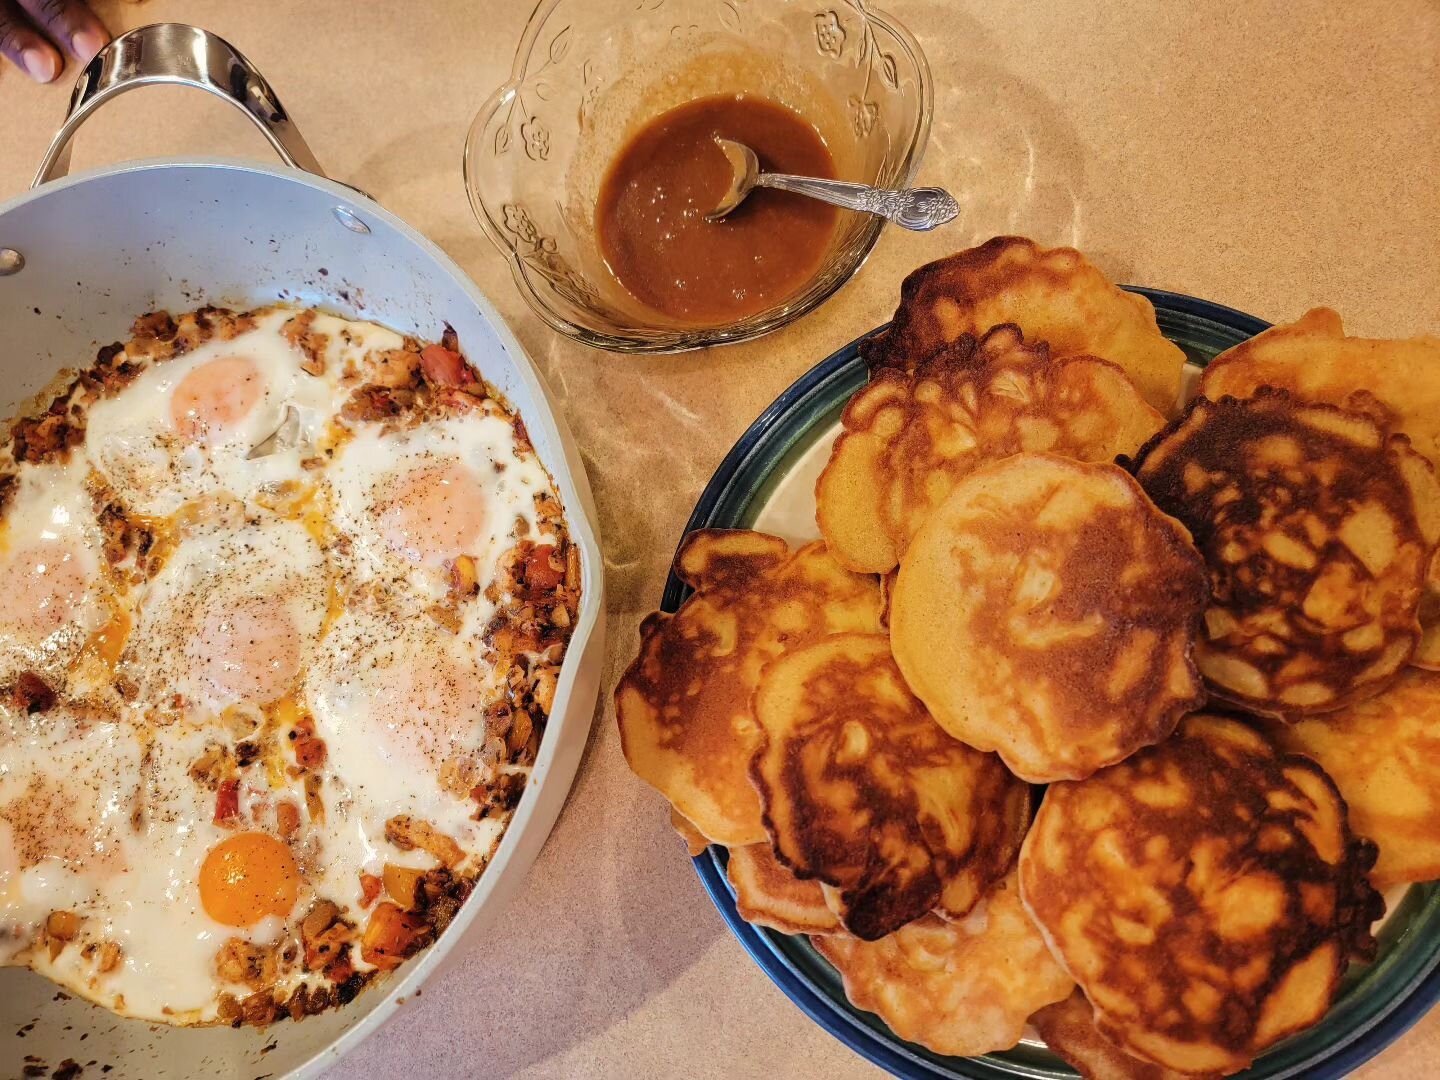 Our Sunday brunch today. Yum! Our taste buds were dancing💃 

🍽My egg dish, apple pancakes, with a caramel topping.

🍳Egg dish: saut&eacute;ed onion, bell pepper, fresh garlic, tomatoes, chicken, a bunch of seasonings, and eggs.

🥞Pancakes: simple